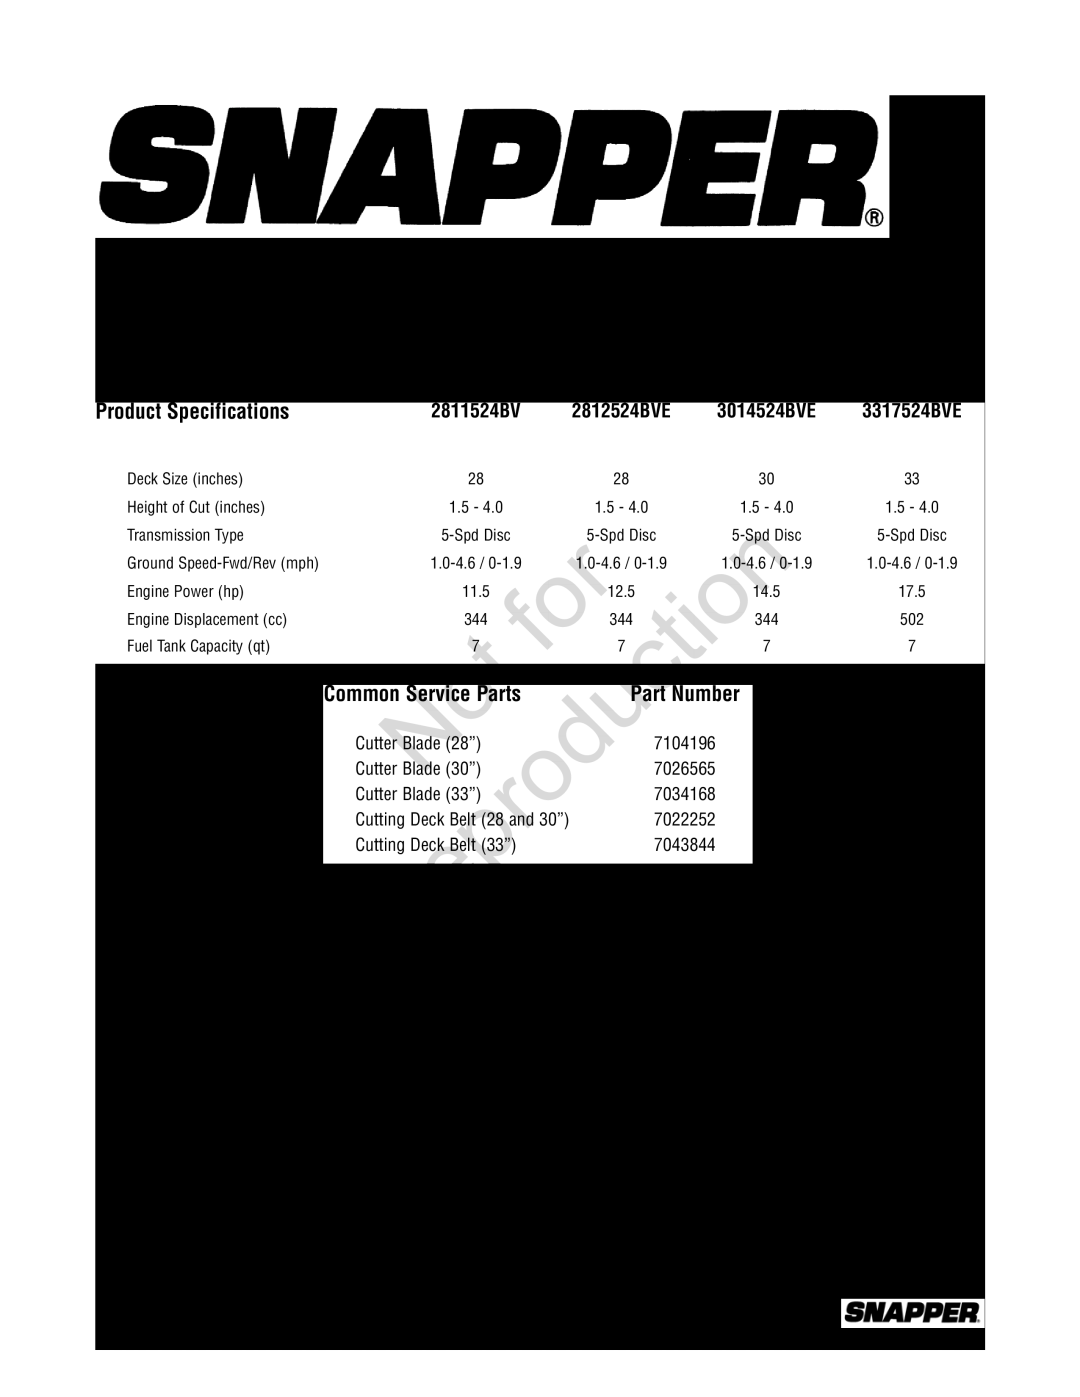 Snapper 7800785, 7800784 manual Common Service Parts, Reproduction, Rear Engine Riding Mower Series, Product Specifications 